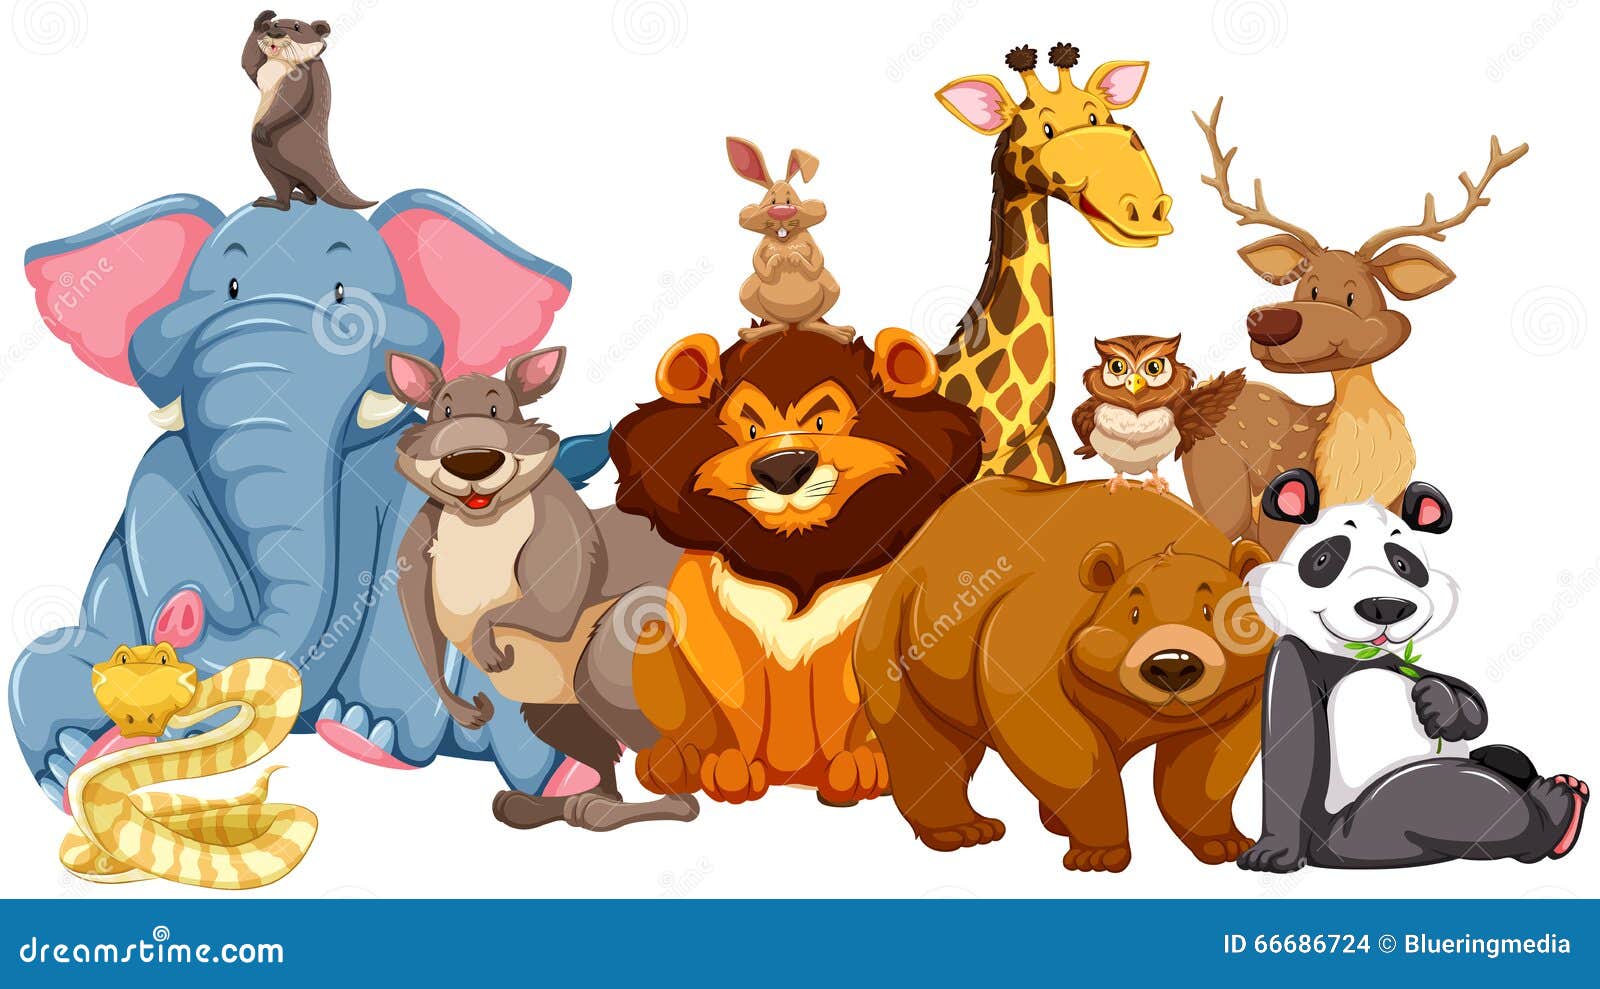 clipart of animals together - photo #31